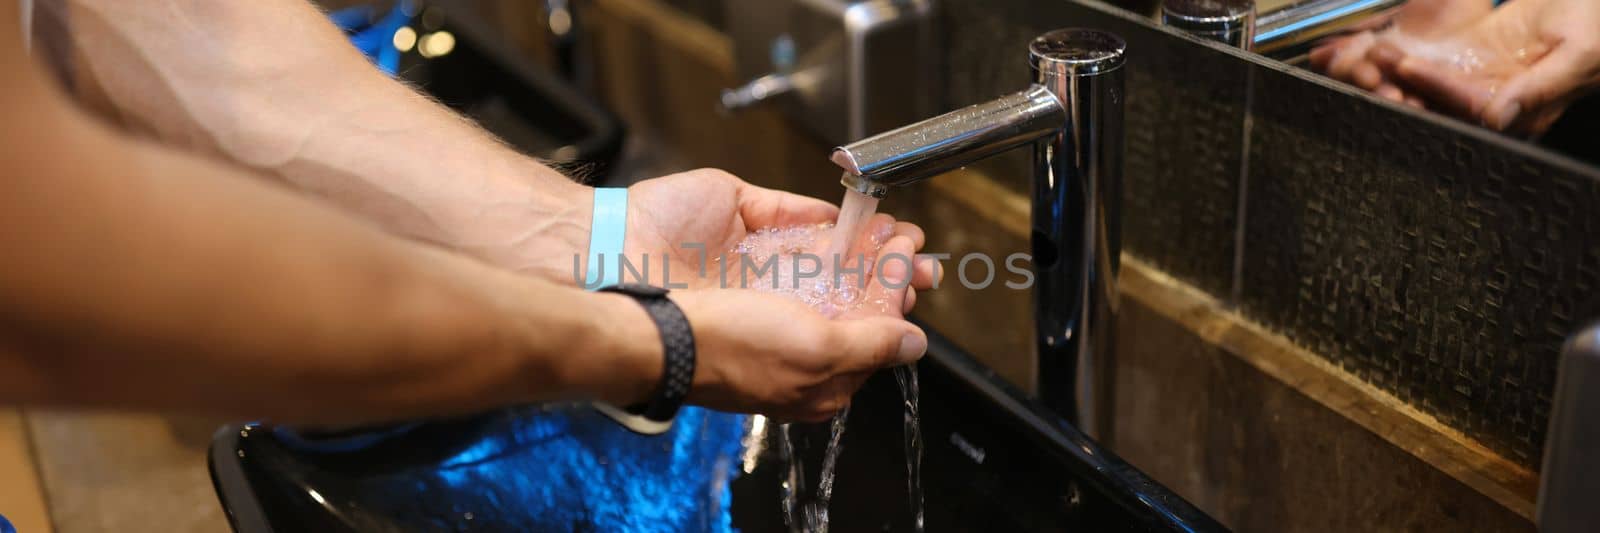 Man washes hands in the sink in bathroom at home checking temperature by touching running water with hand by kuprevich